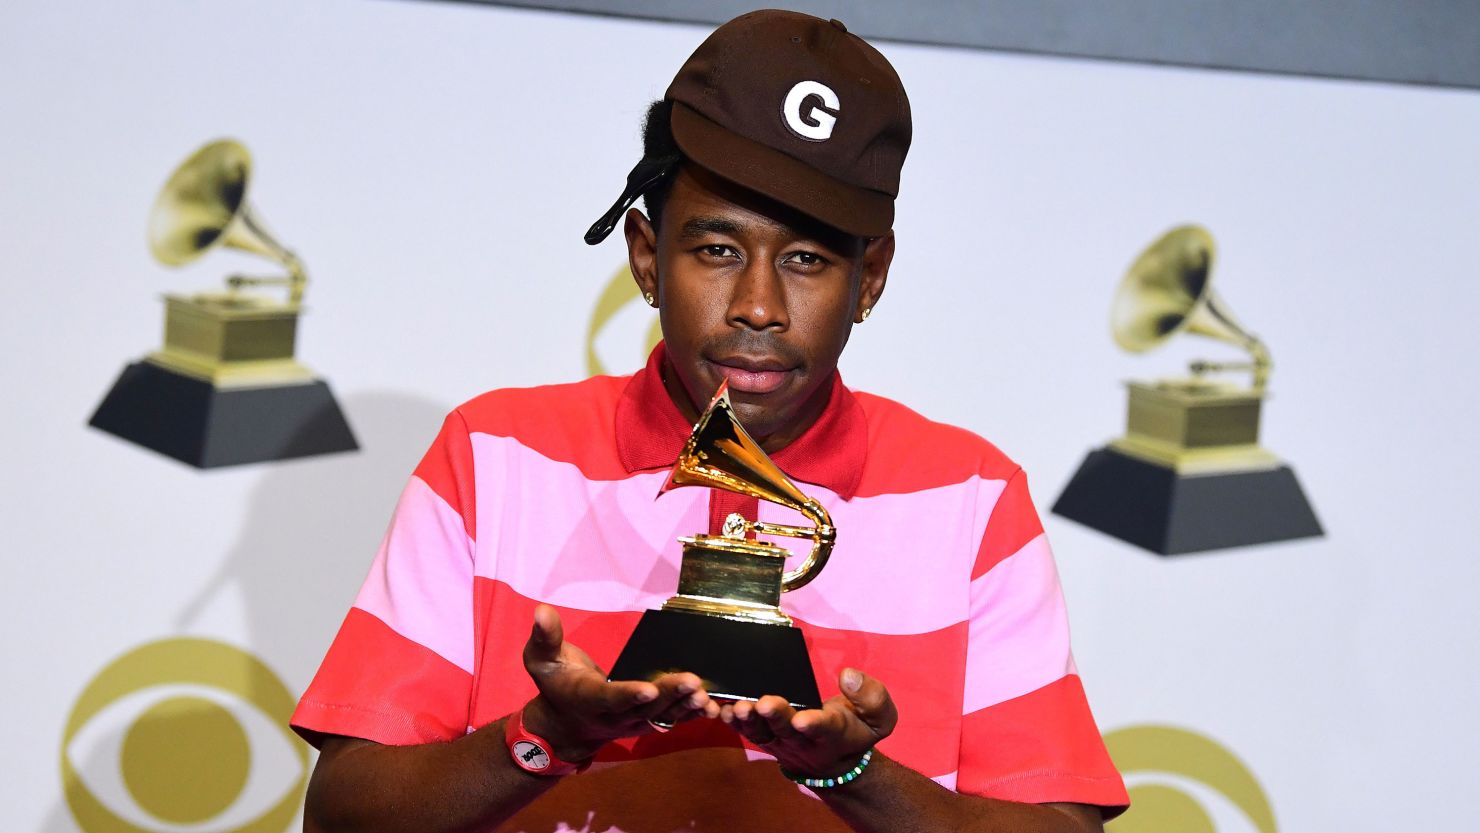 US rapper Tyler, the Creator has been critical of the Grammys' use of the word "urban" for categories.